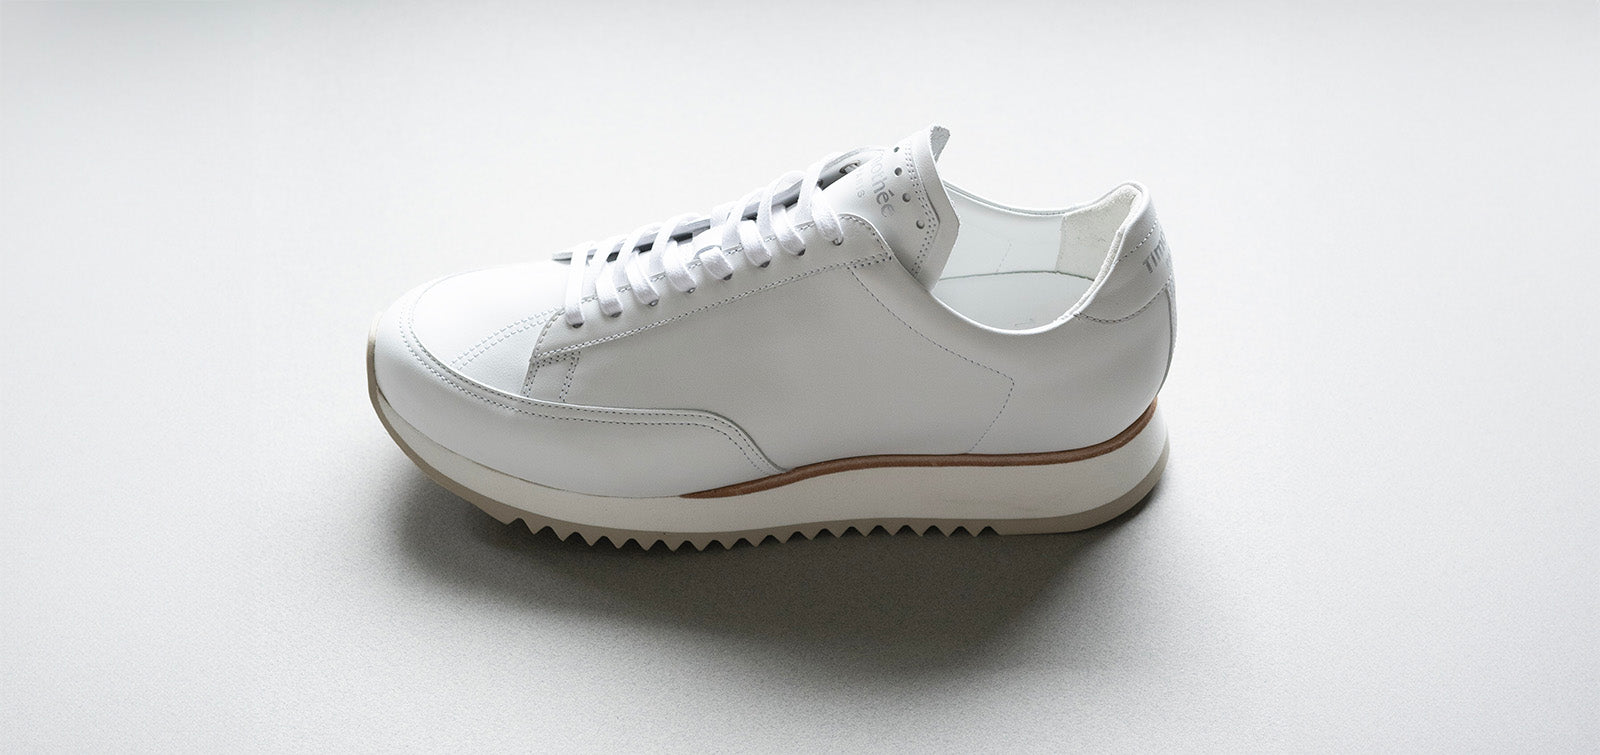 Our Cabourg Sneaker